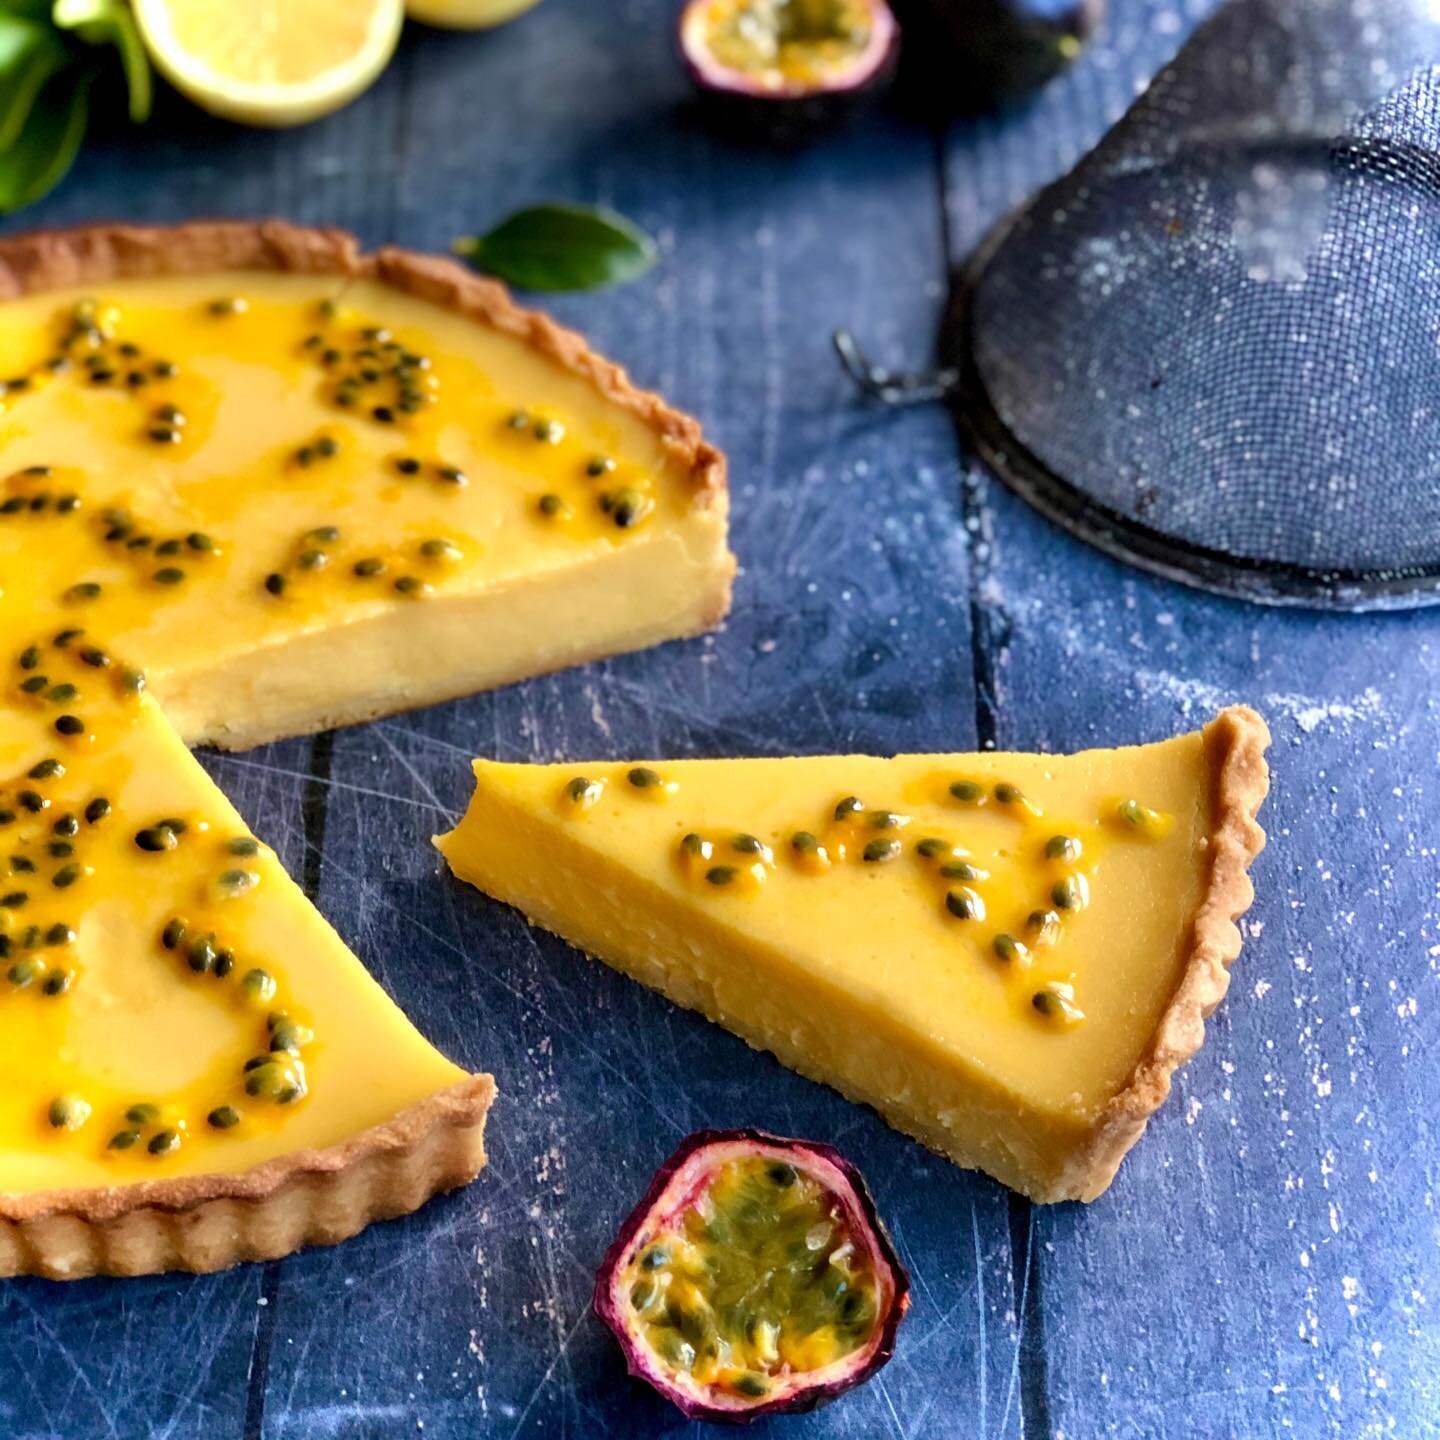 Here it is! Passion fruit and lemon tart. A great use for all the passion fruits falling of my vine. Simple yet delicious! 
Recipe coming soon including a raw vegan version and a pavlova using the left over tart mix to make baked passionfruit curd! 
